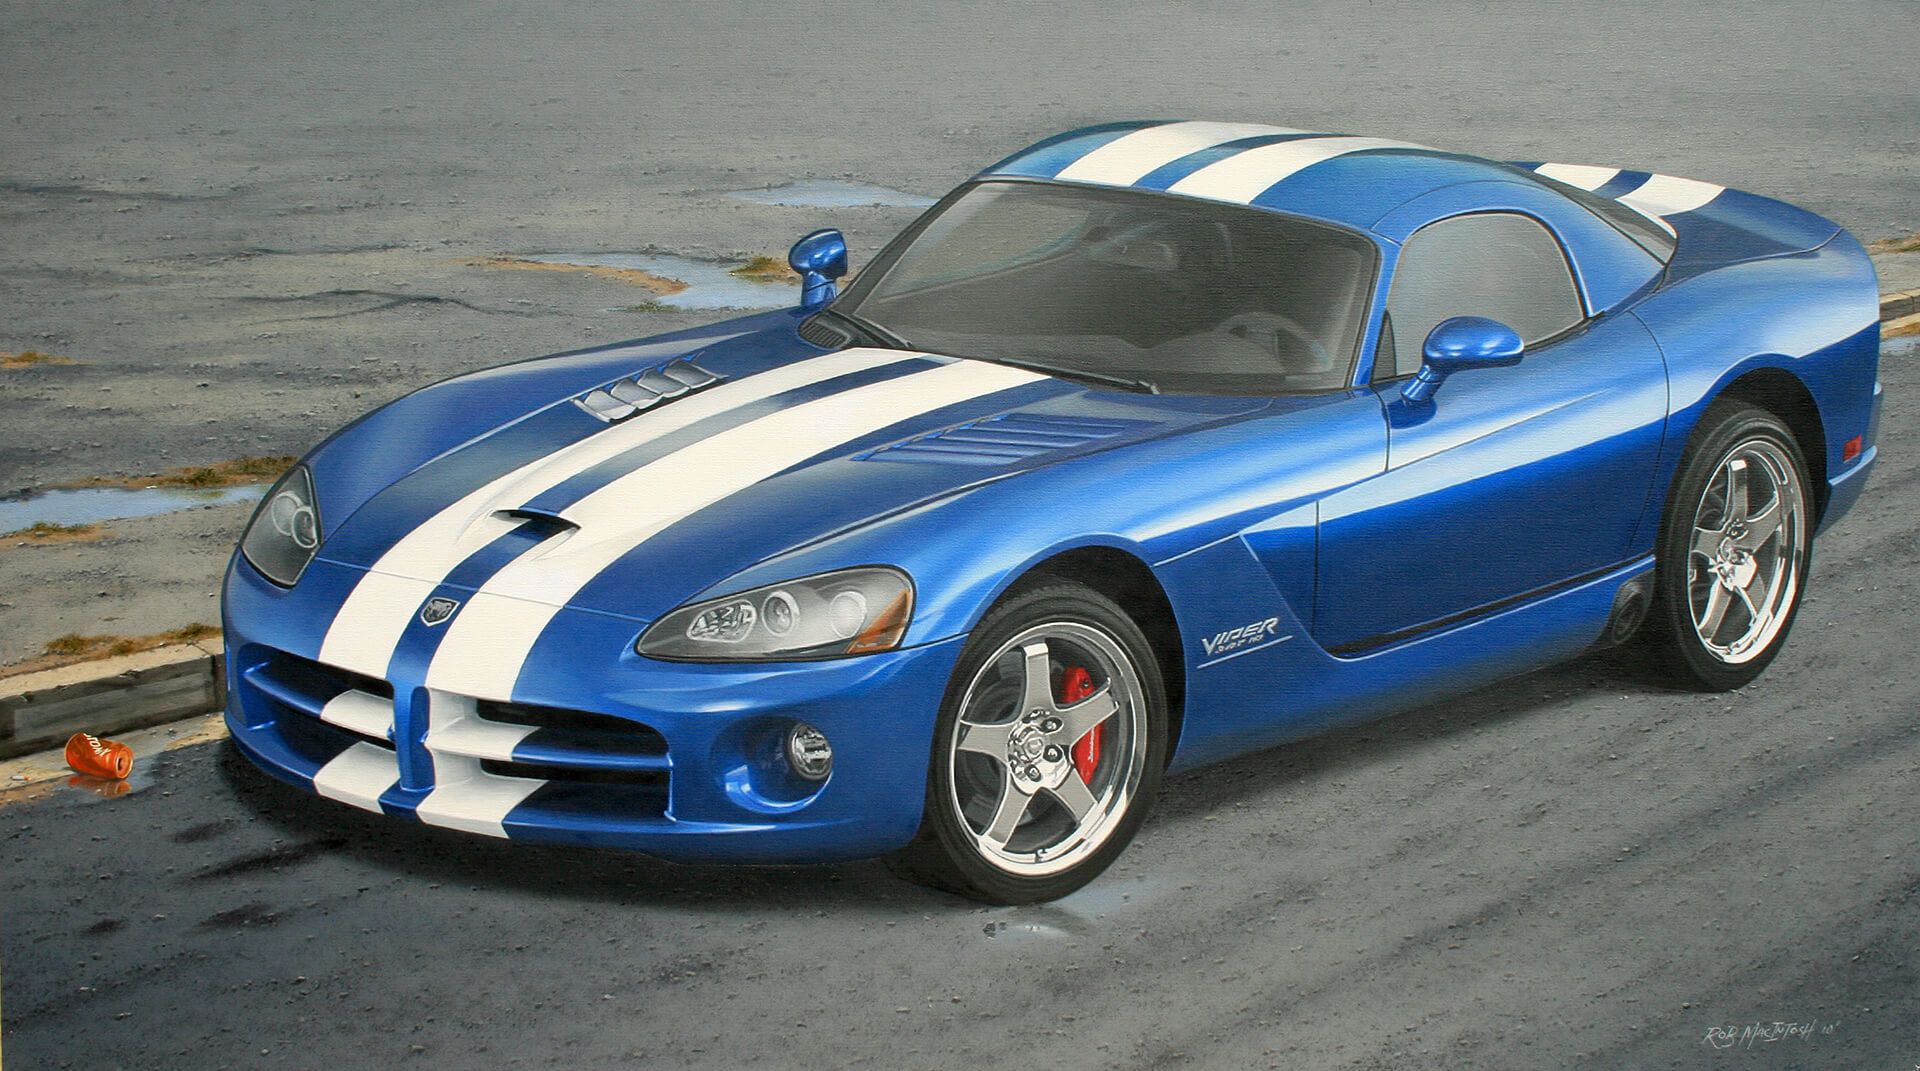 Photorealistic painting of a Dodge Viper racing car